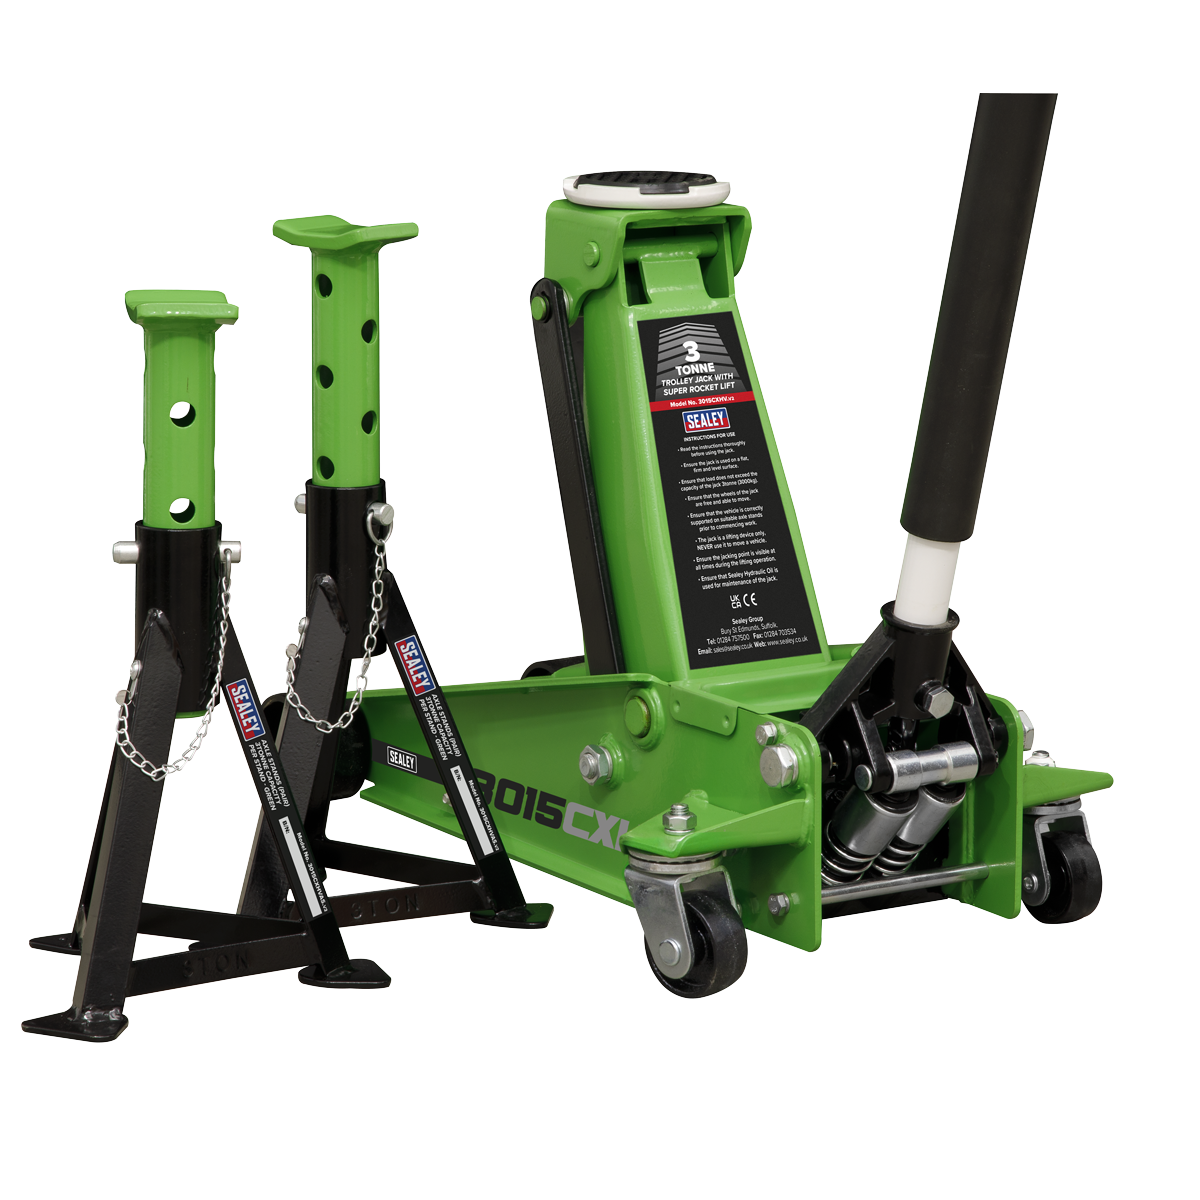 Sealey 3tonne Trolley Jack with Super Rocket Lift & Axle Stands (Pair) - Hi-Vis Green 3015CXHV